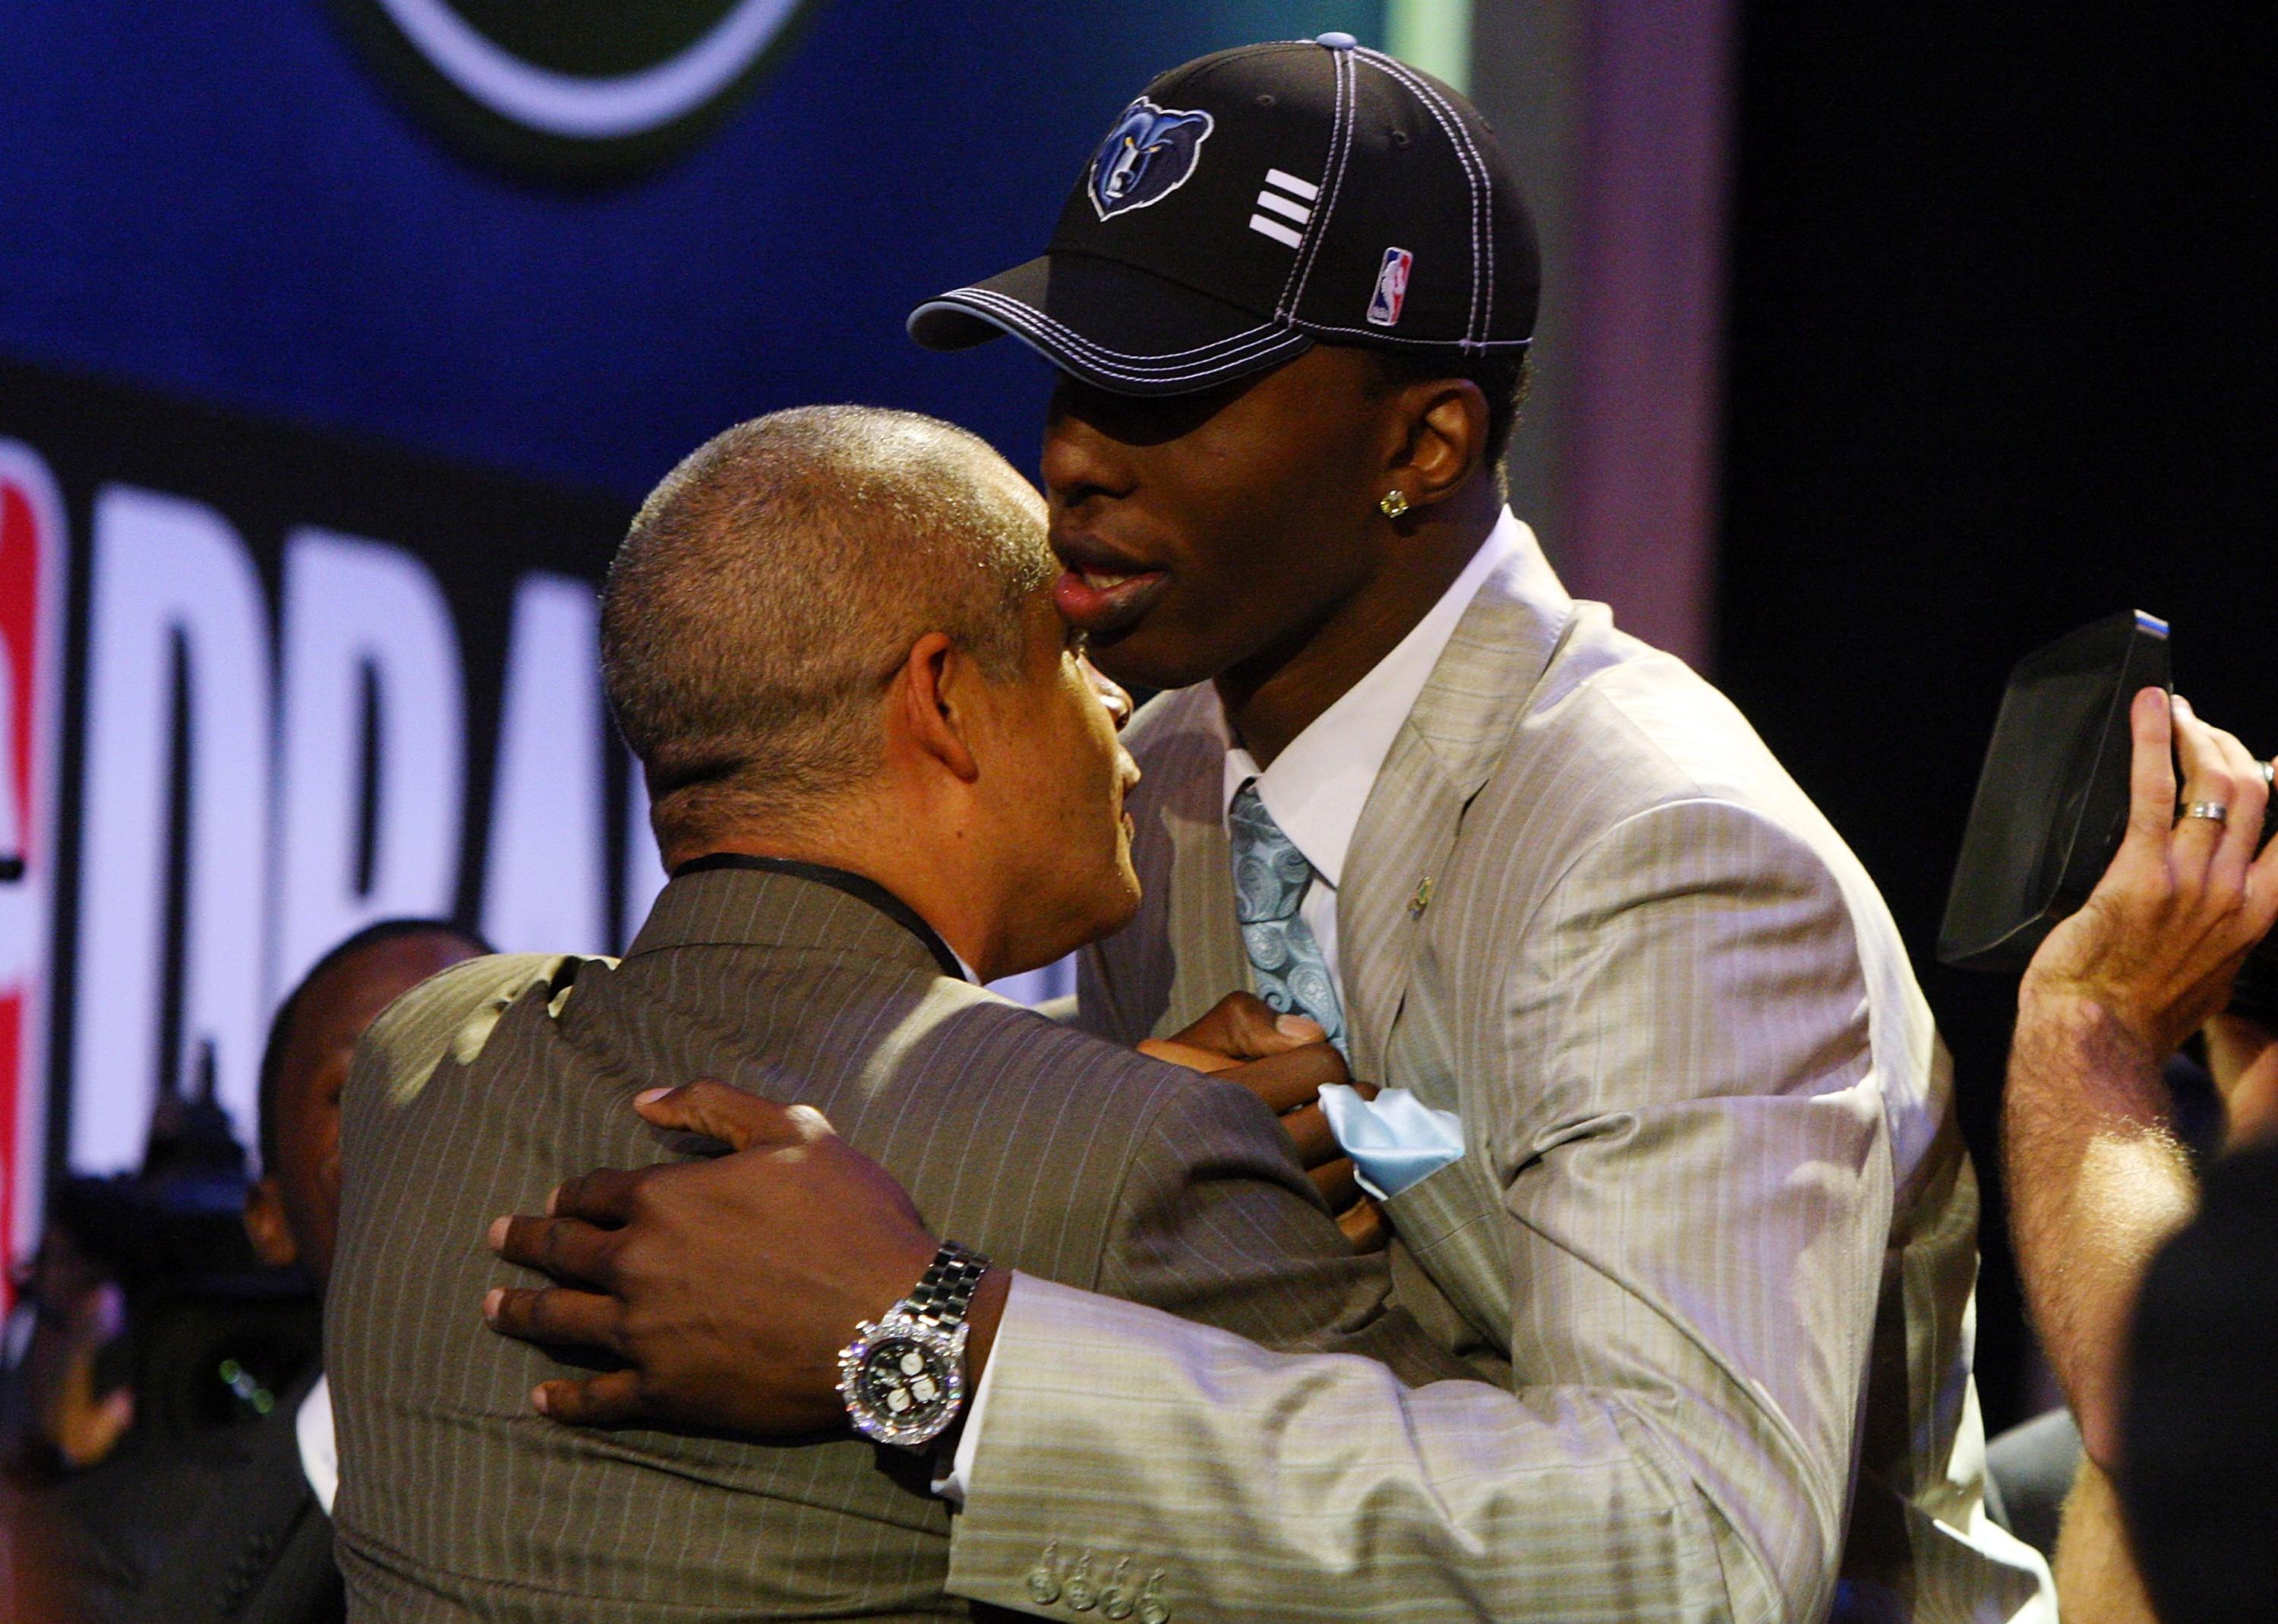 Hasheem Thabeet is congratulated during the 2009 NBA Draft.